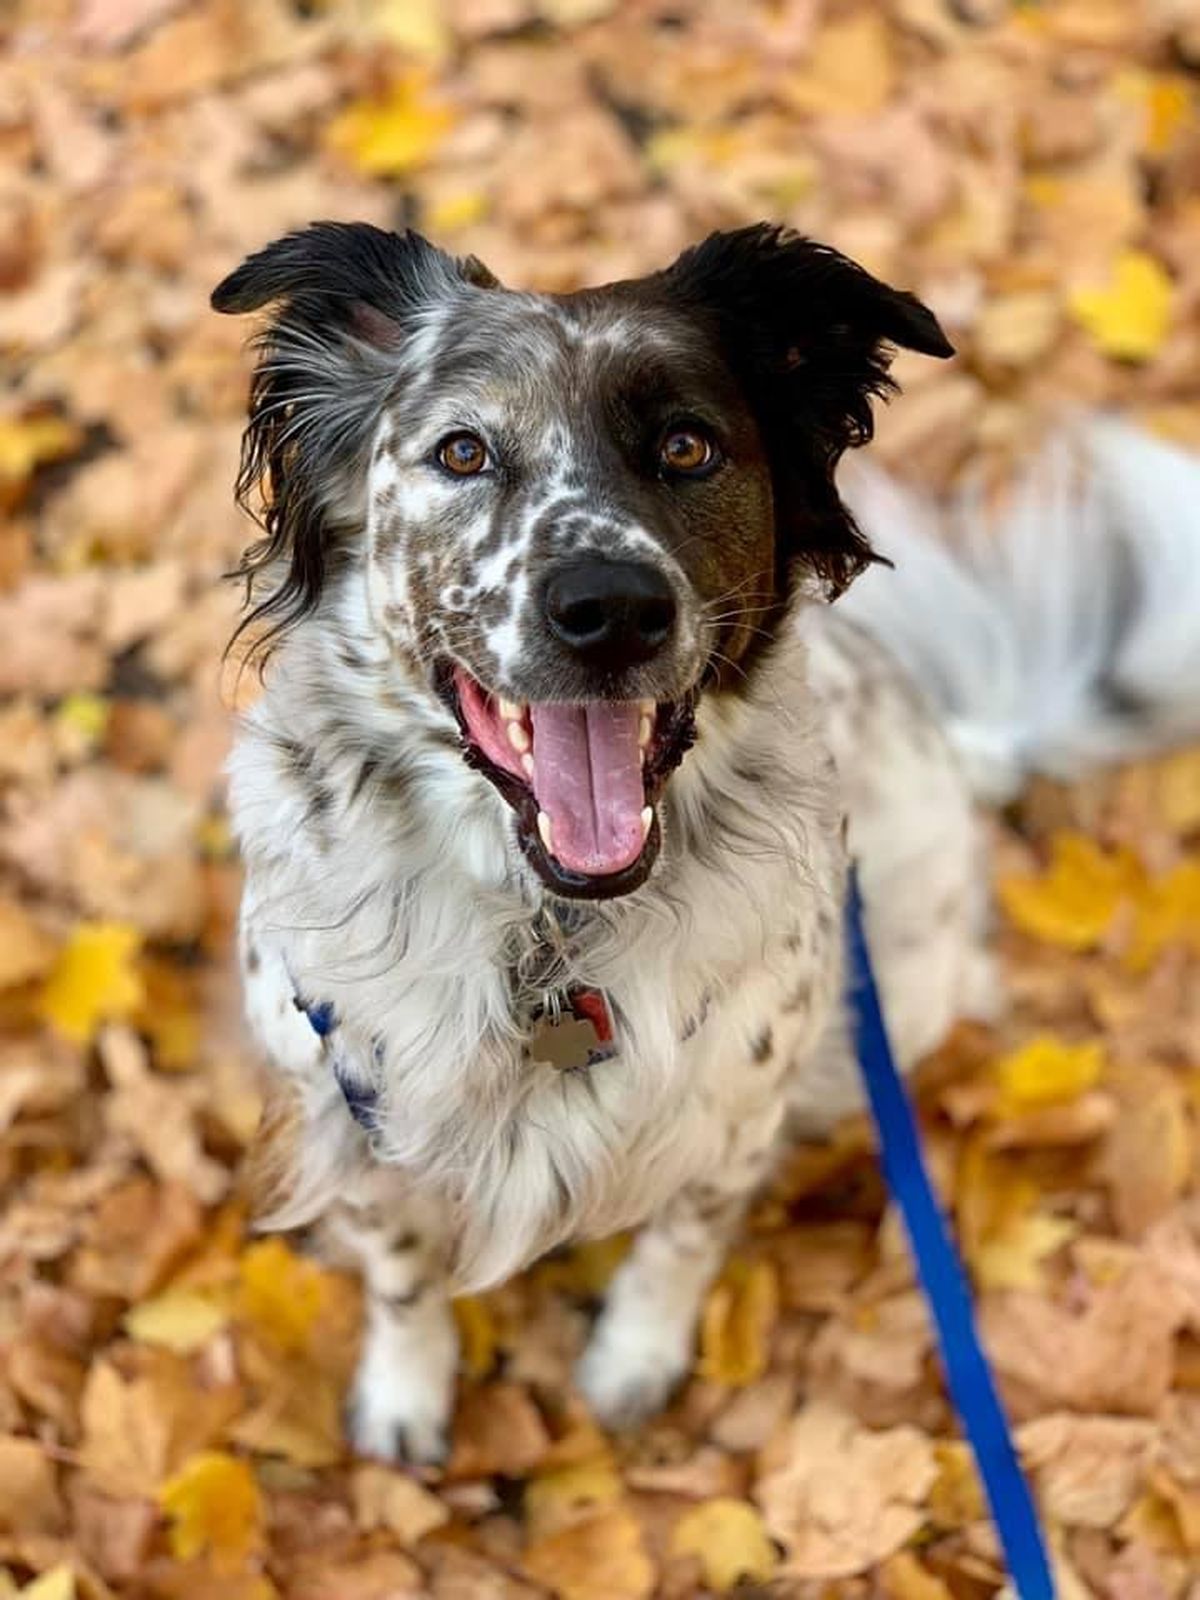 Five months after 4-year-old collie mix Hank (pictured), was electrocuted on a heated downtown sidewalk, the Spokane City Council passed a new law that would require local businesses to update heated sidewalks to modern safety standards. (Courtesy)